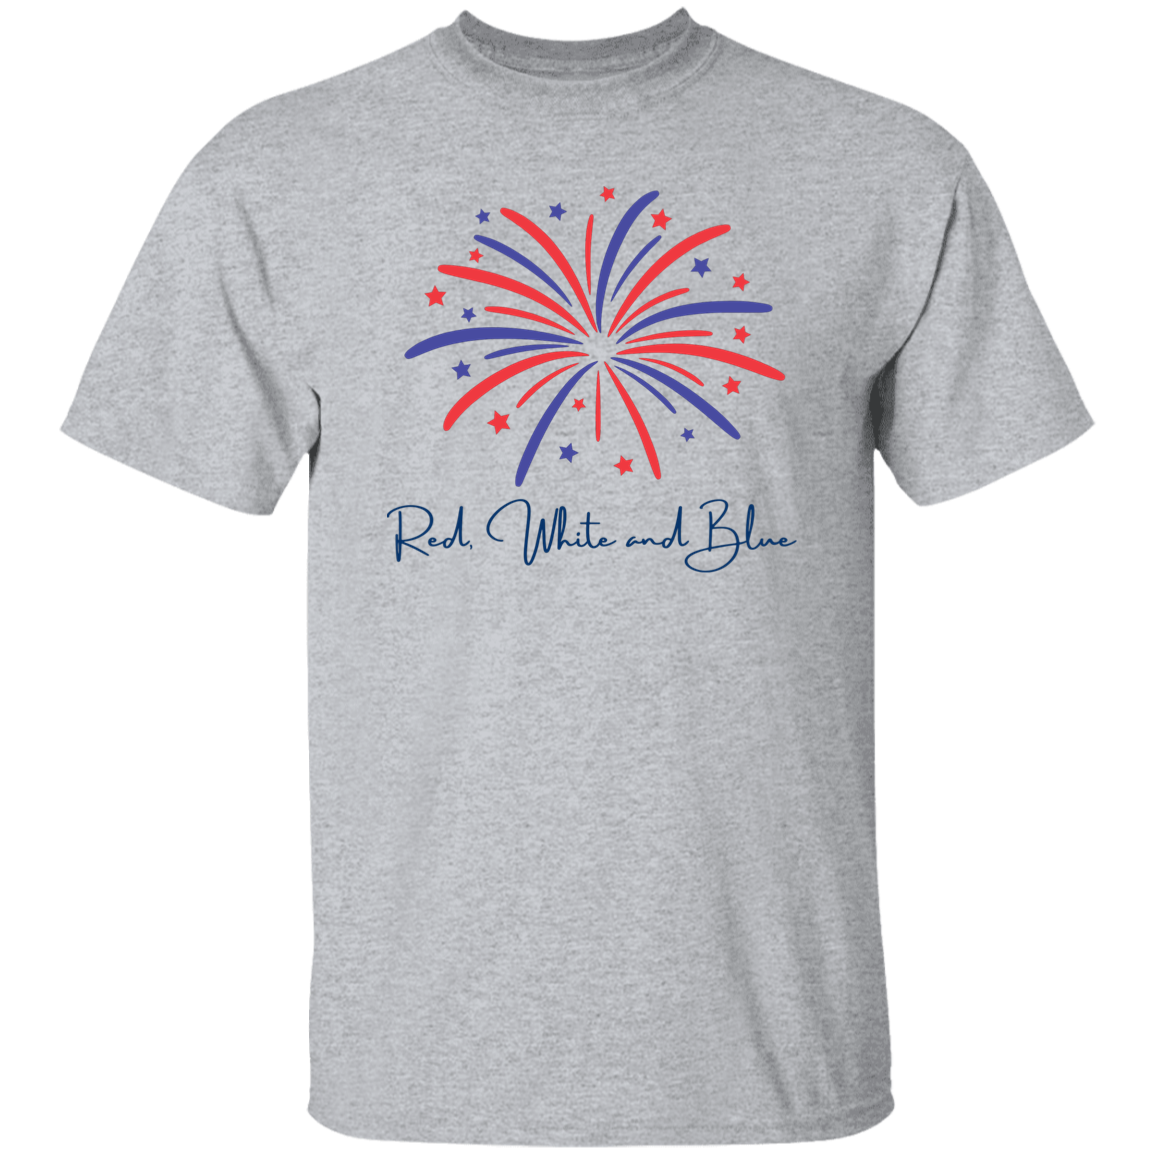 4th of July | T-Shirt | Fireworks | White, Grey